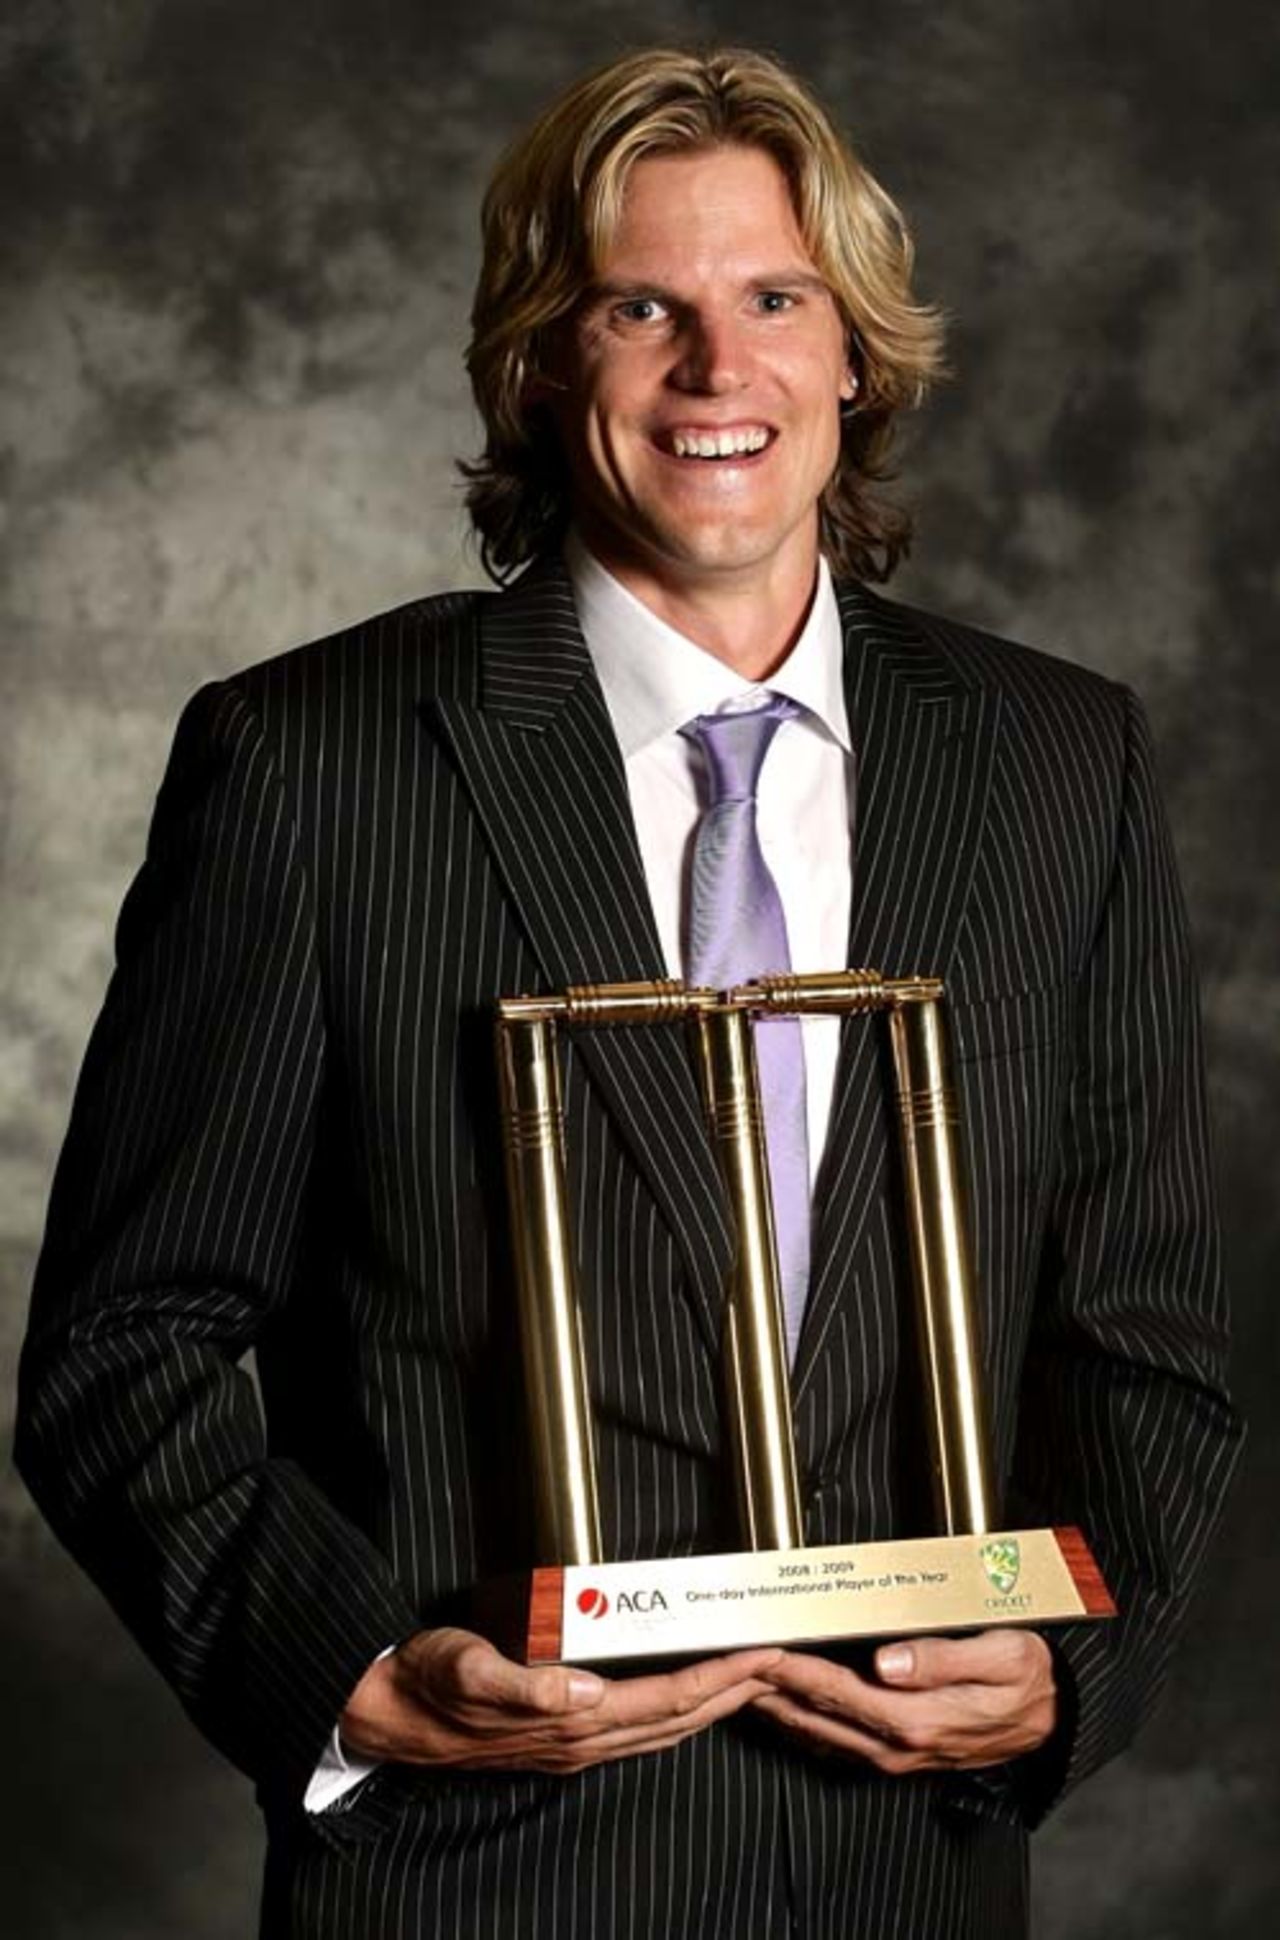 Nathan Bracken won the award for ODI Player of the Year, February 3, 2009